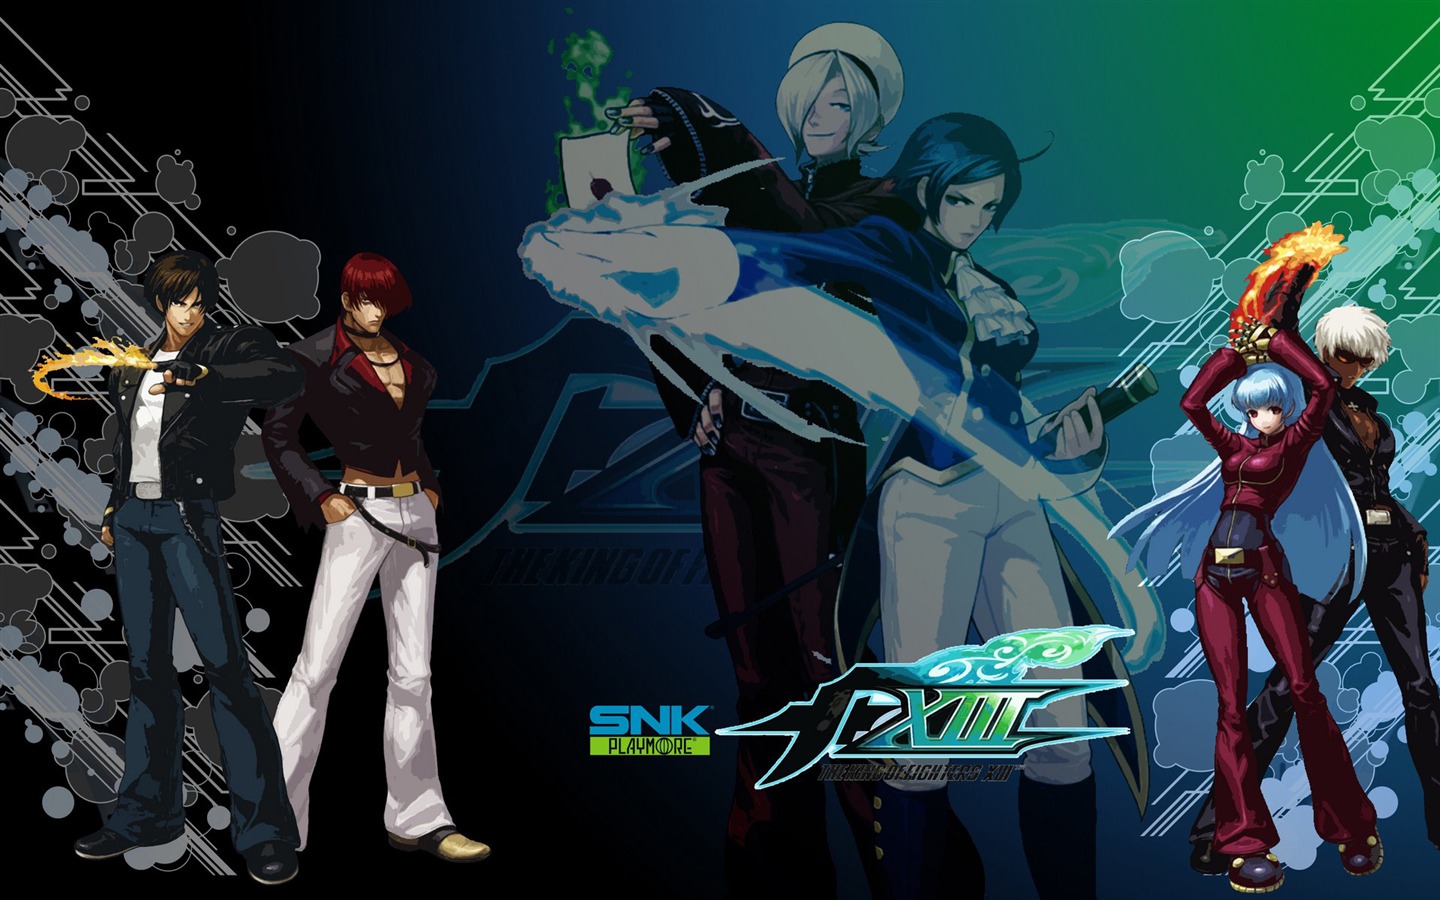 The King of Fighters XIII wallpapers #4 - 1440x900